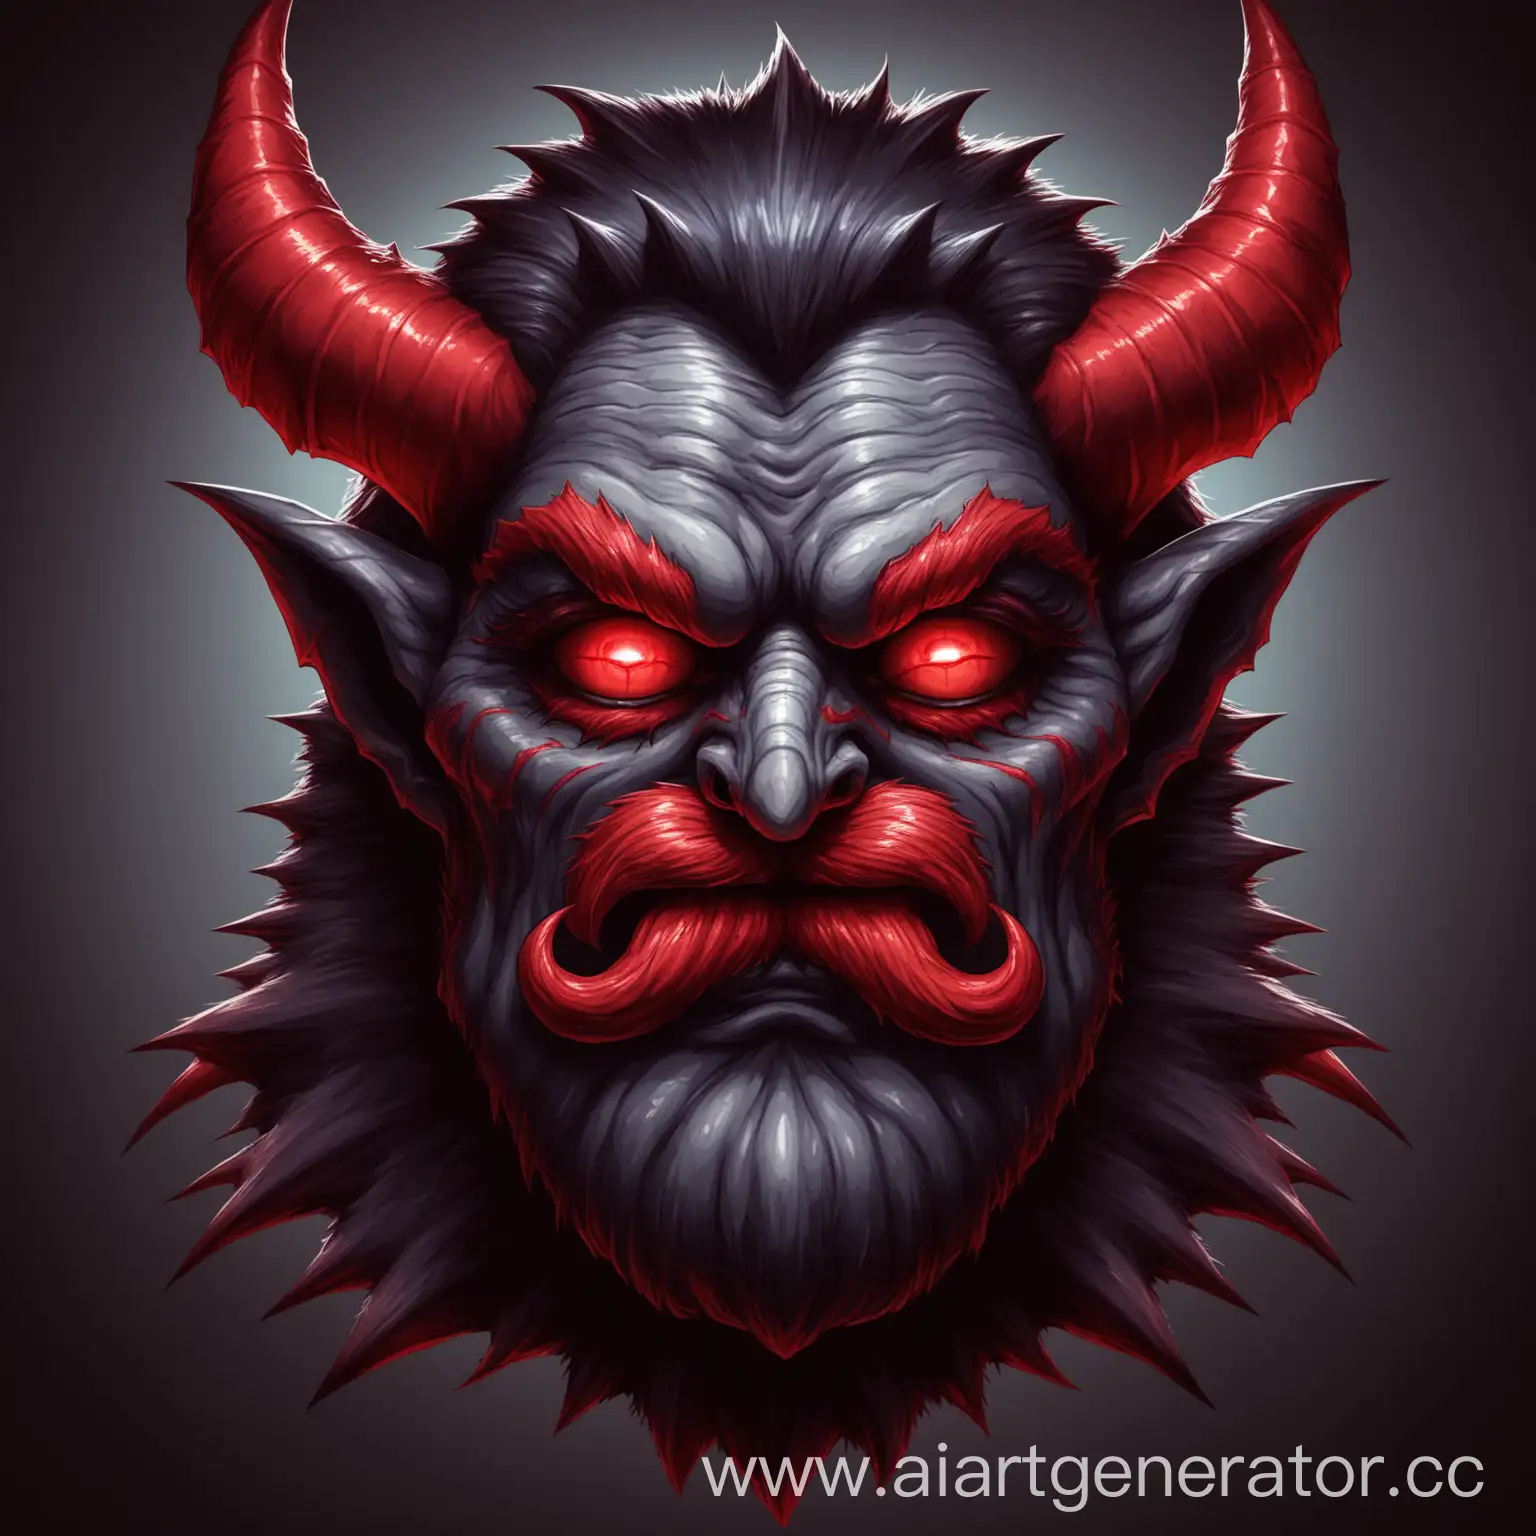 Sinister-Monster-Demon-Head-with-Fiery-Red-Eyes-and-Menacing-Mustaches